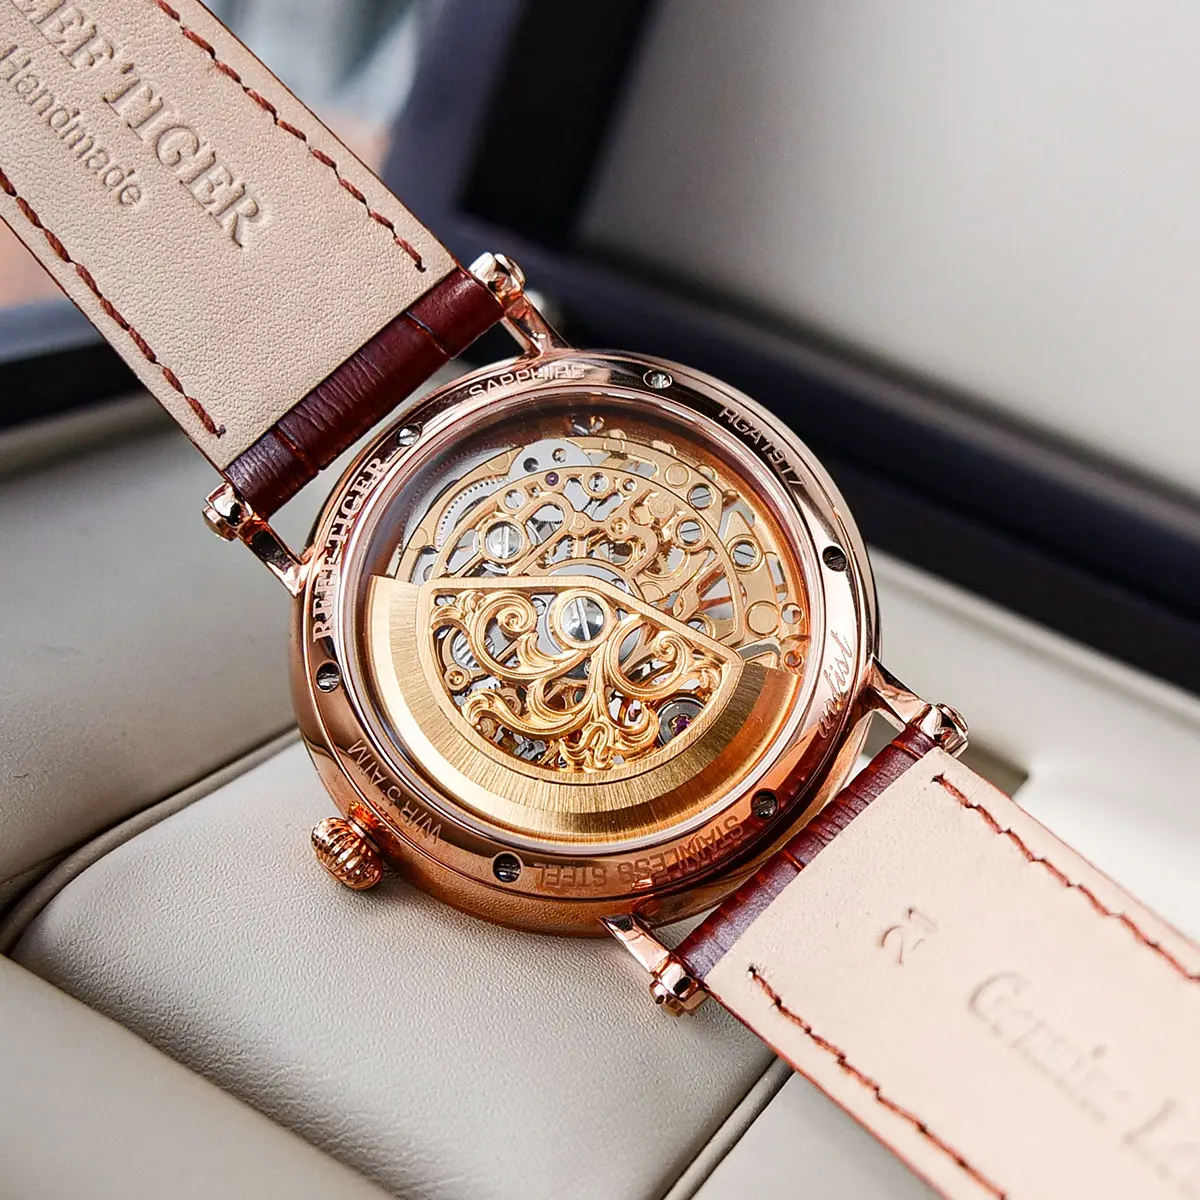 

Reef Tiger/RT Men's Vintage Business Automatic Watches with Skeleton Dial Rose Gold Tone Brown Leather Strap Watch RGA1917